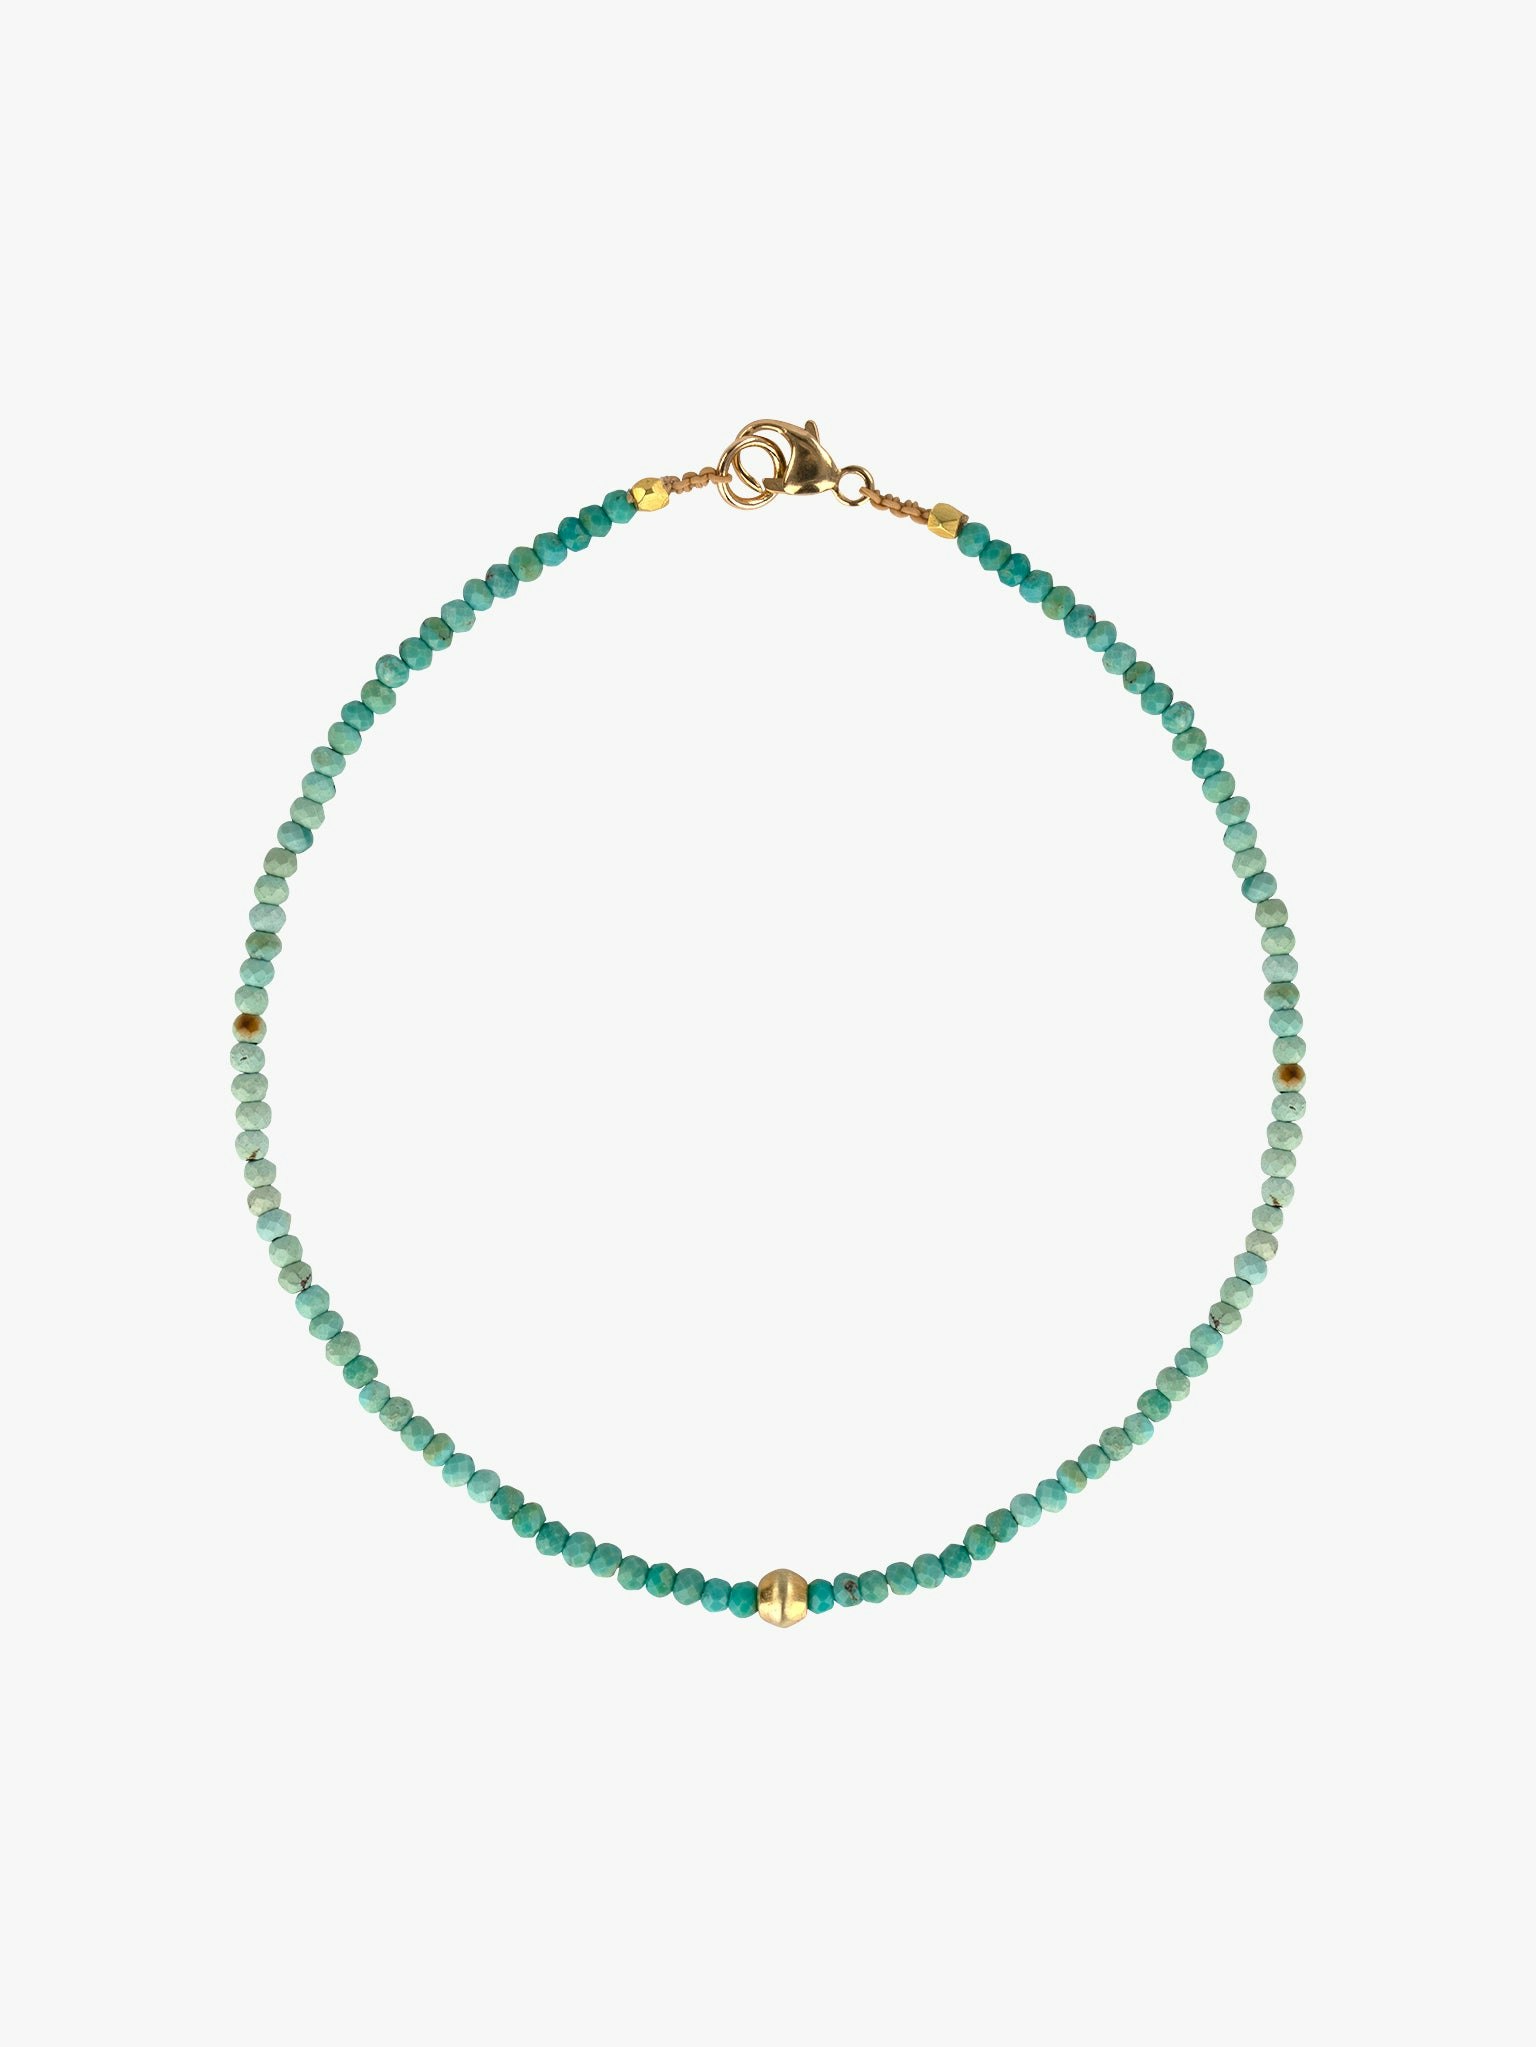 Ombre turquoise and gold beaded bracelet video